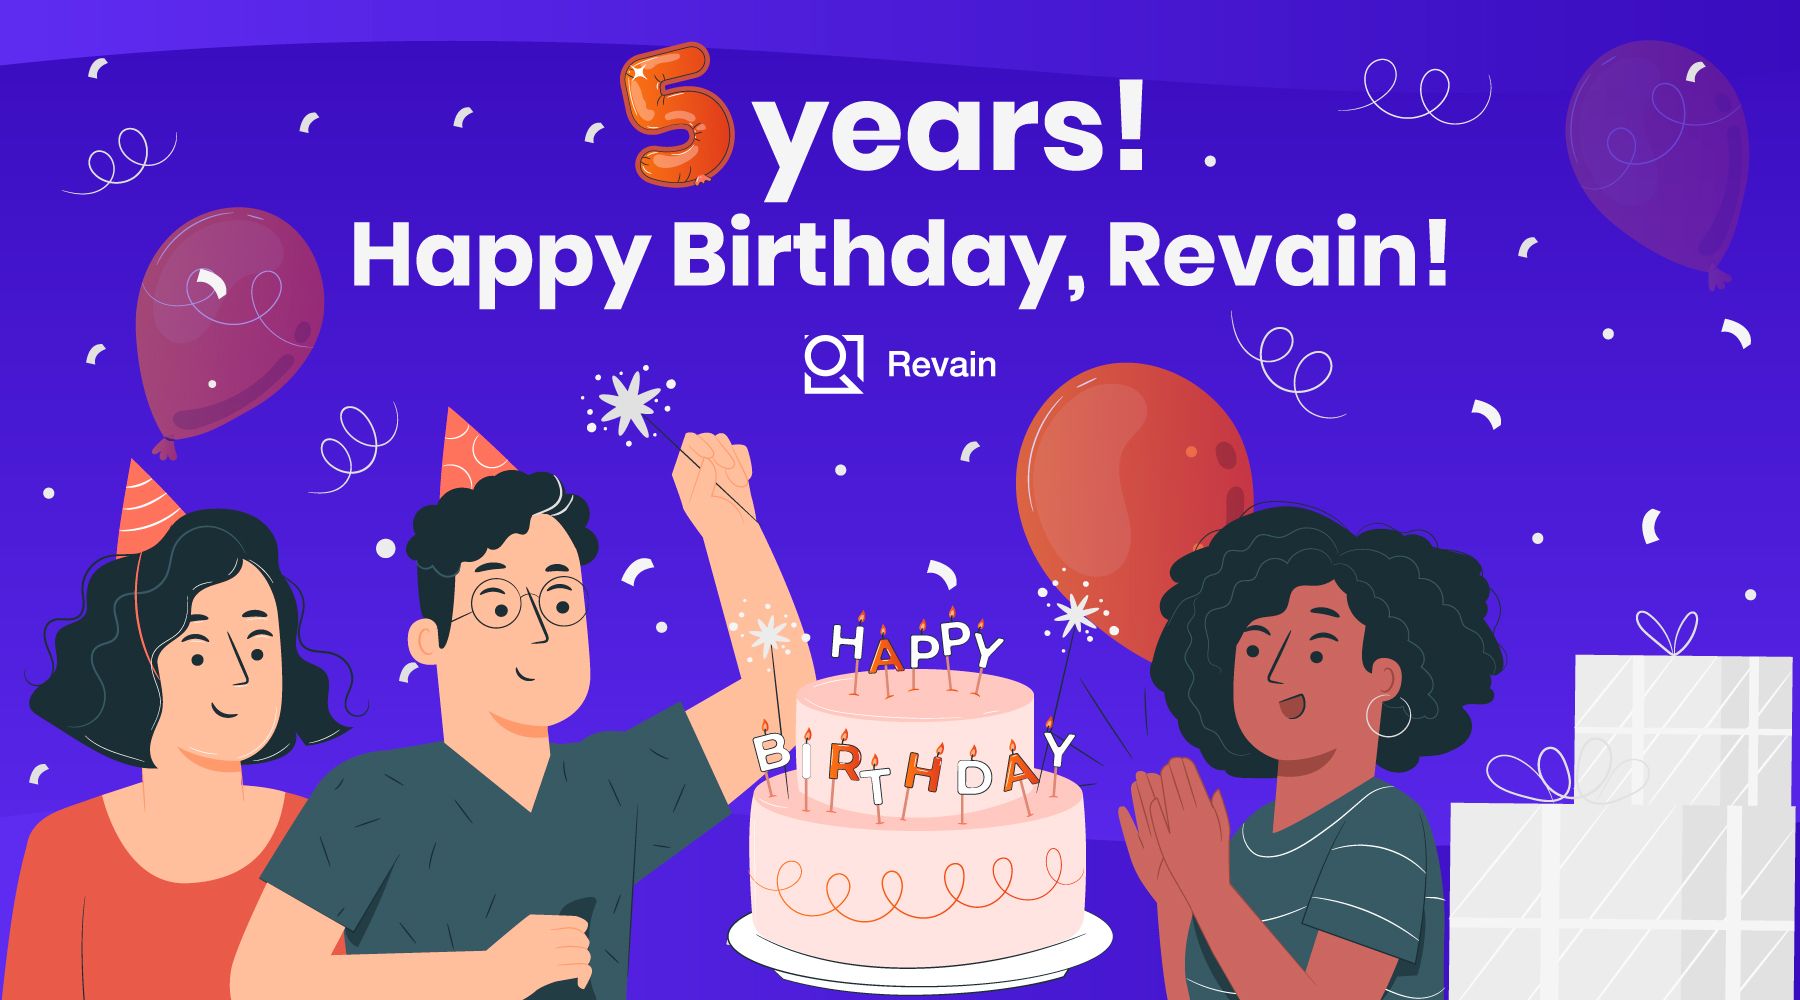 Revain’s birthday is here! Community is celebrating our 5th anniversary! 